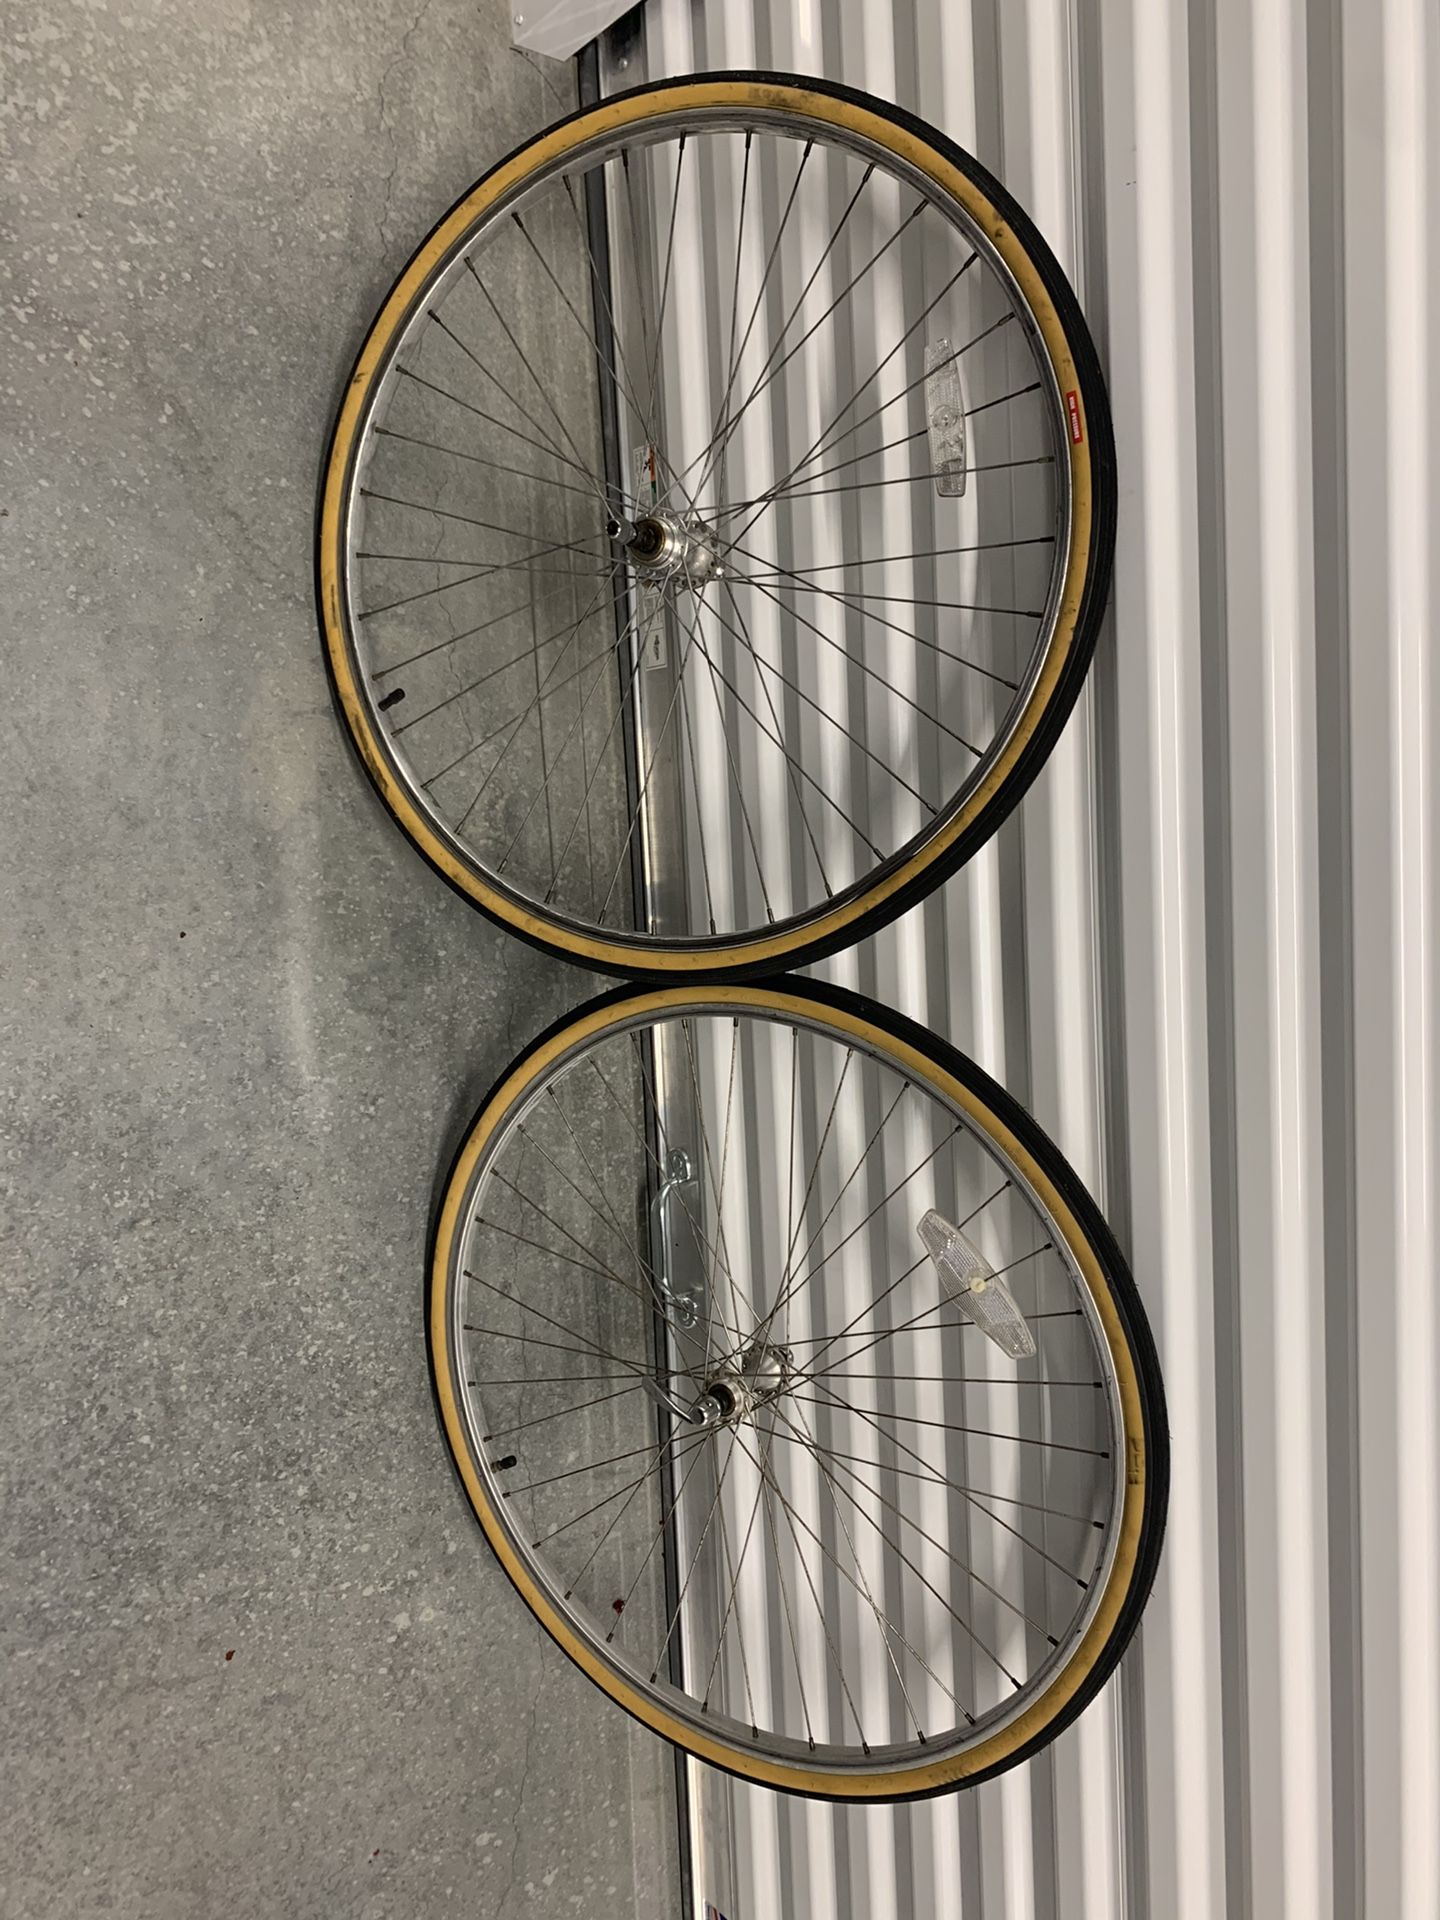 27” road bike wheels and fairly new tires